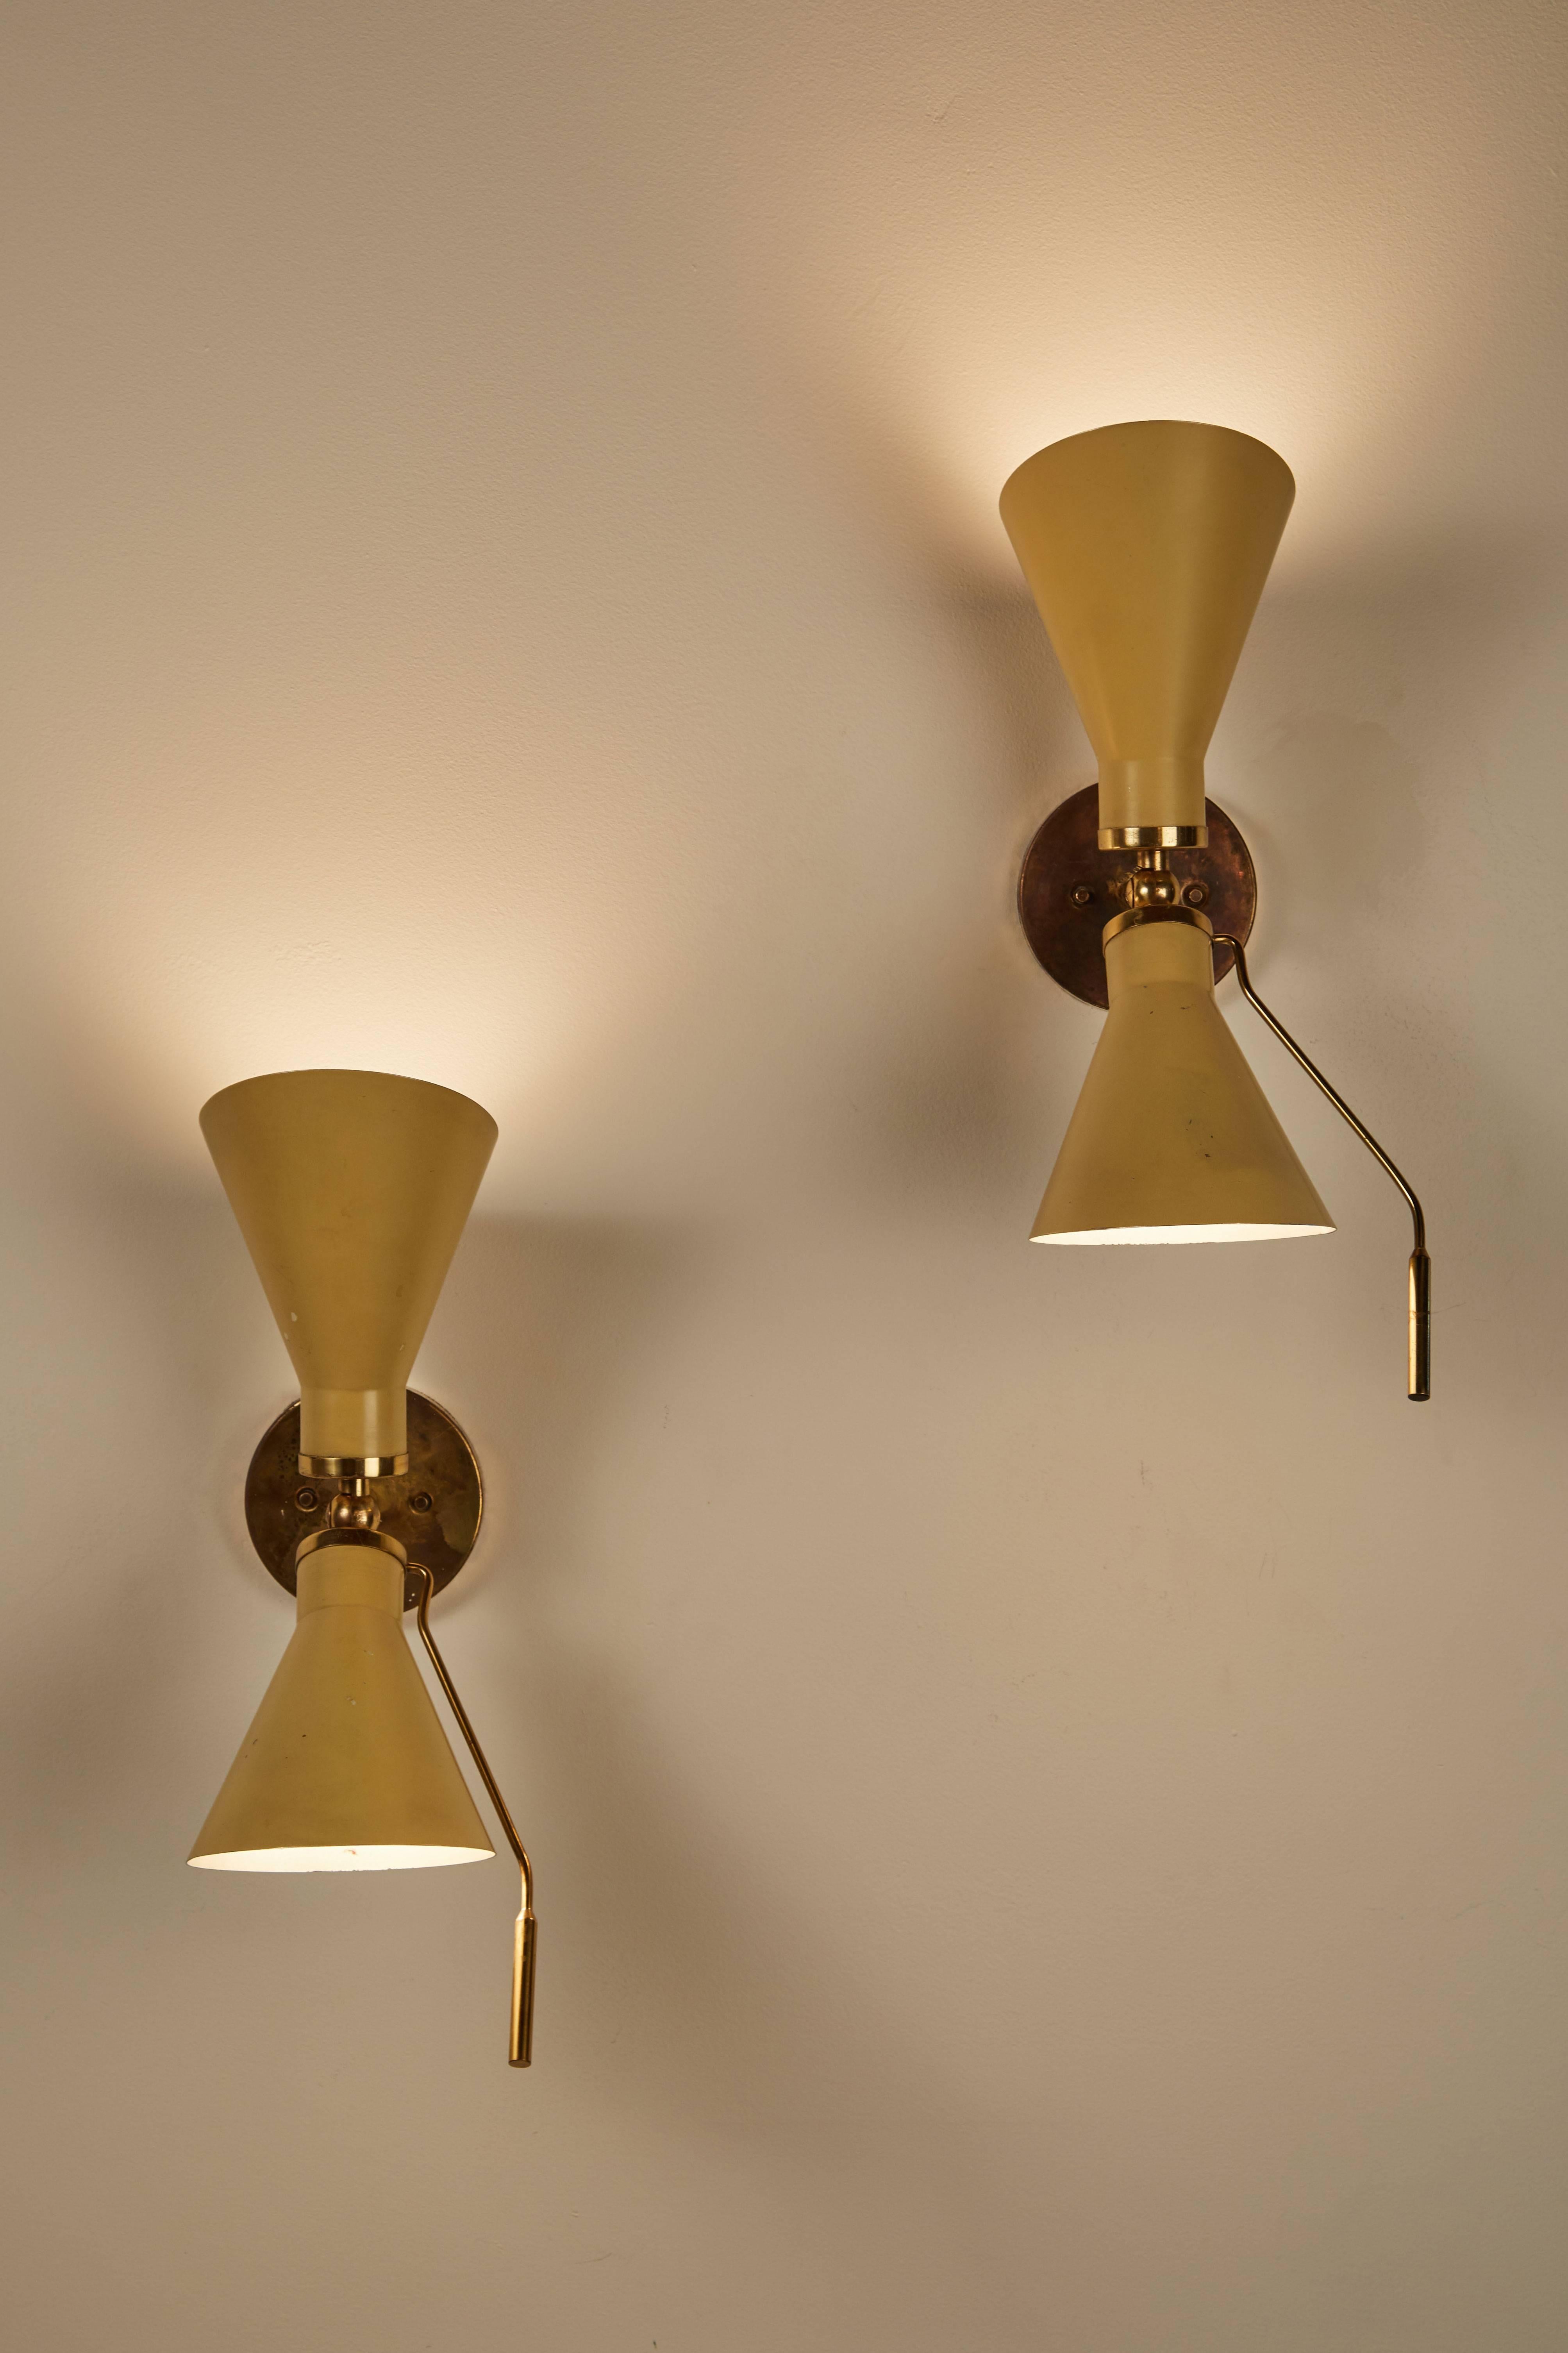 Pair of Model 131 articulating sconces by Gino Sarfatti designed in Italy, circa 1950s. Original backplates. Wired for US junction boxes. Each sconces takes an E14 75w maximum European candelabra. Literature: Gino Sarfatti Selected Works 1938-1973